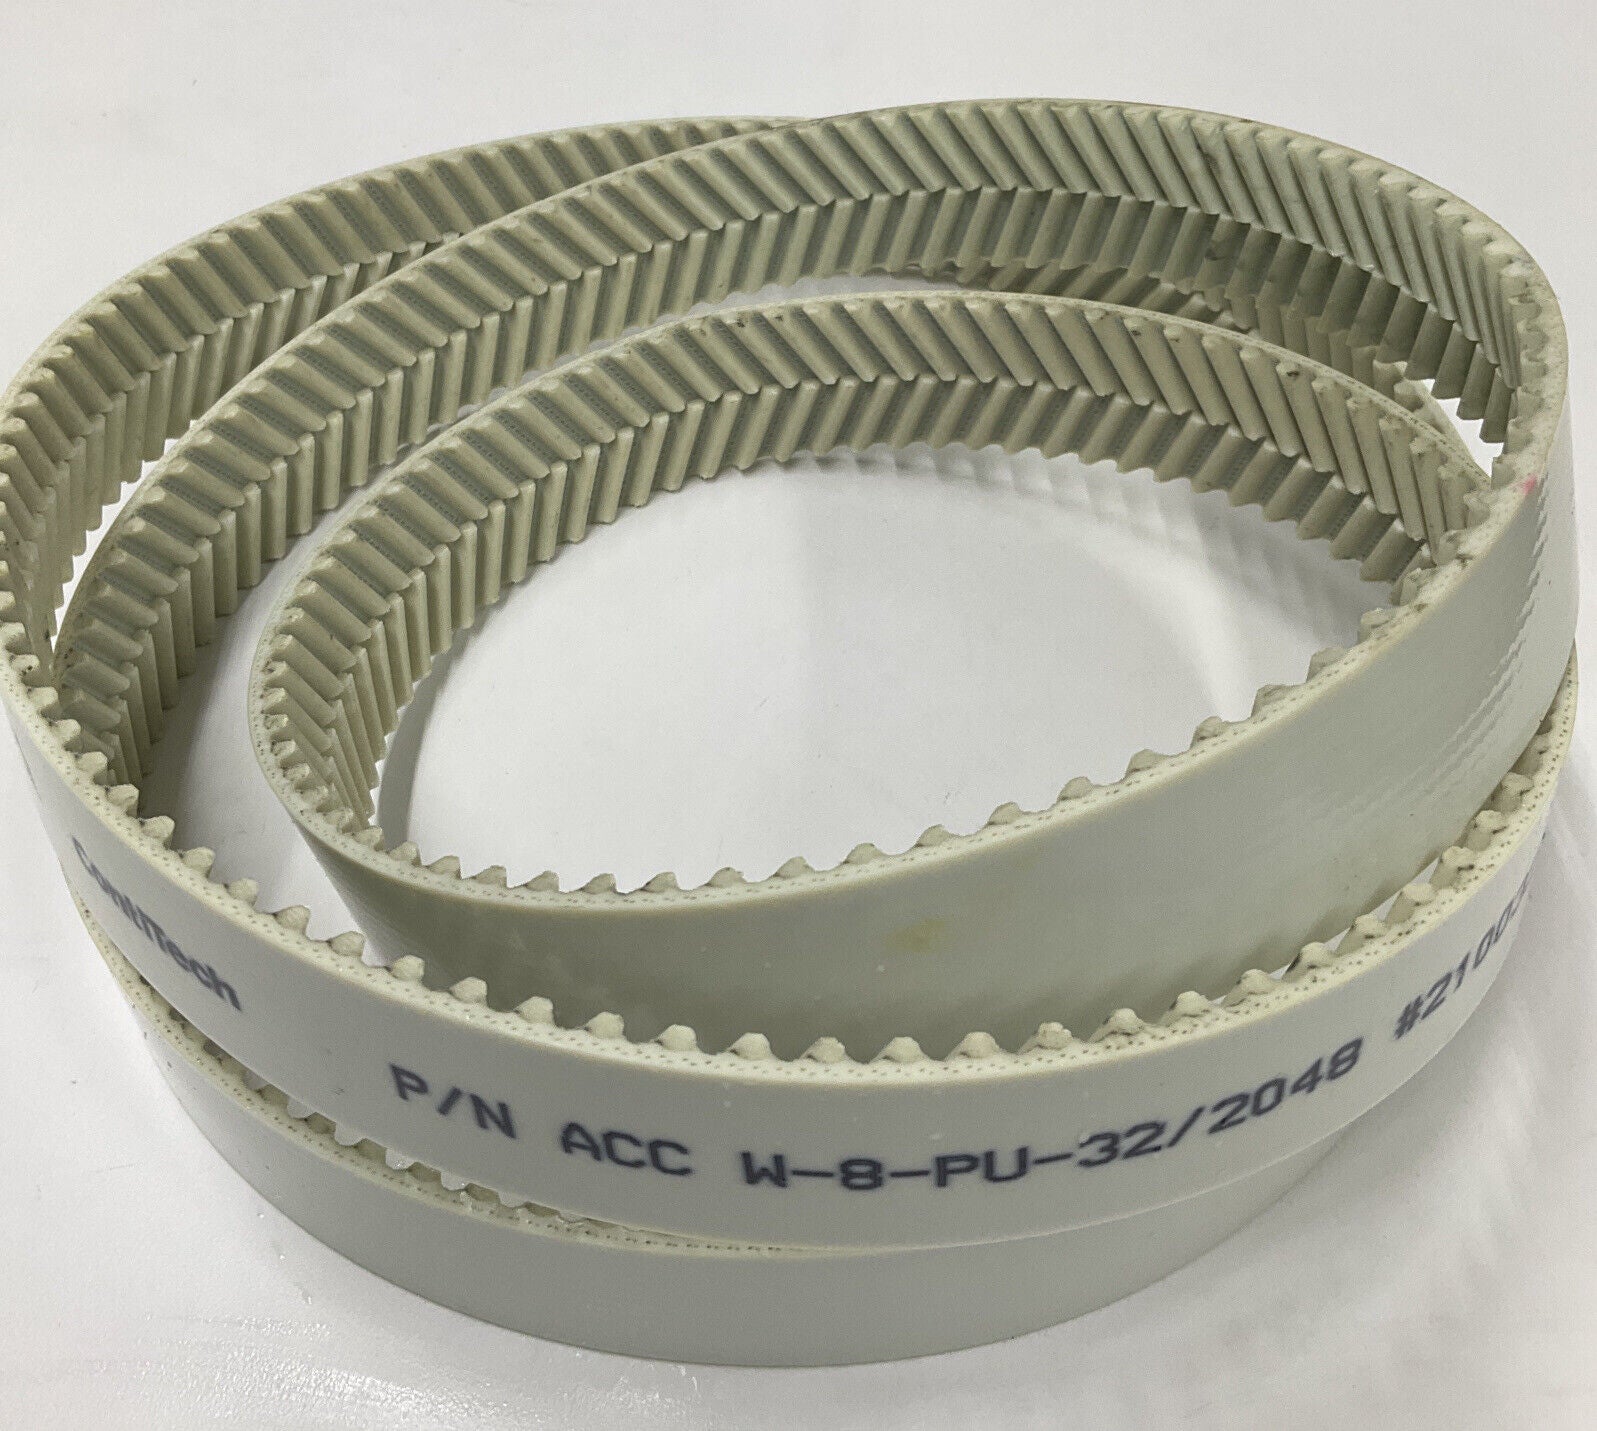 Continental ContiTech ACC W-8-PU-322/2048 Helical Offset Tooth Belt (BE118)